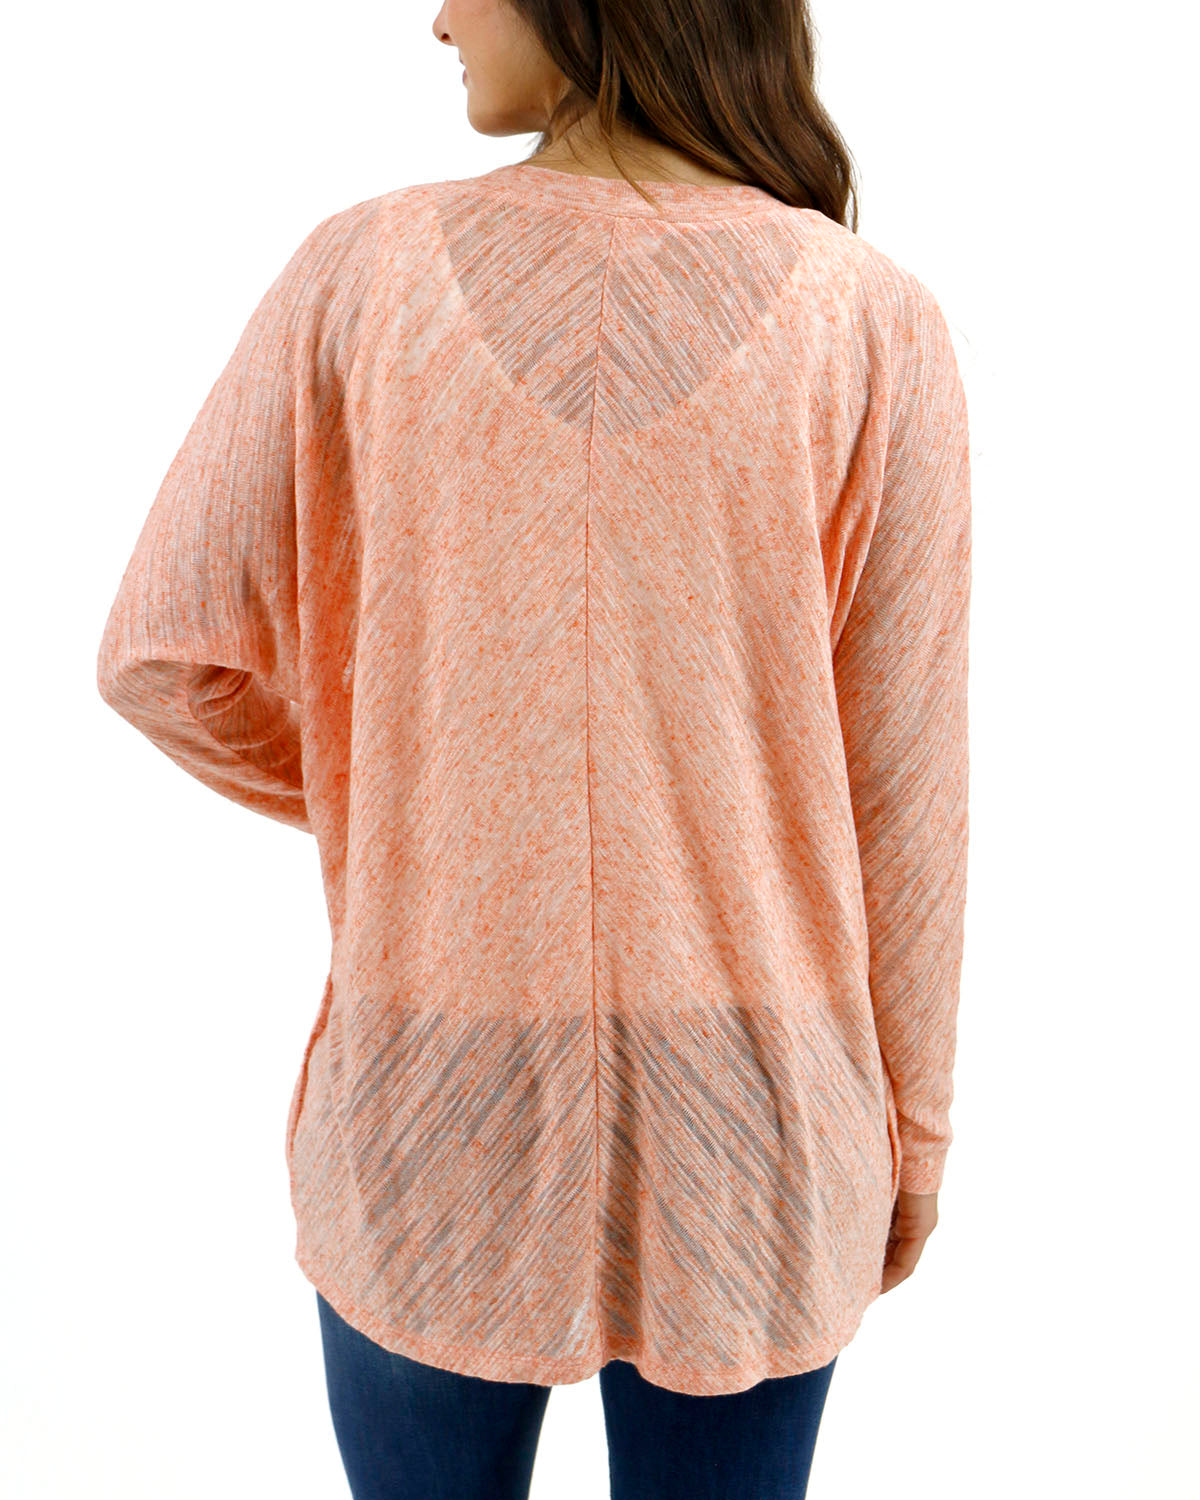 Airy Cocoon Slub Cardigan in SALE - Grace Lace Dreamsicle FINAL and 